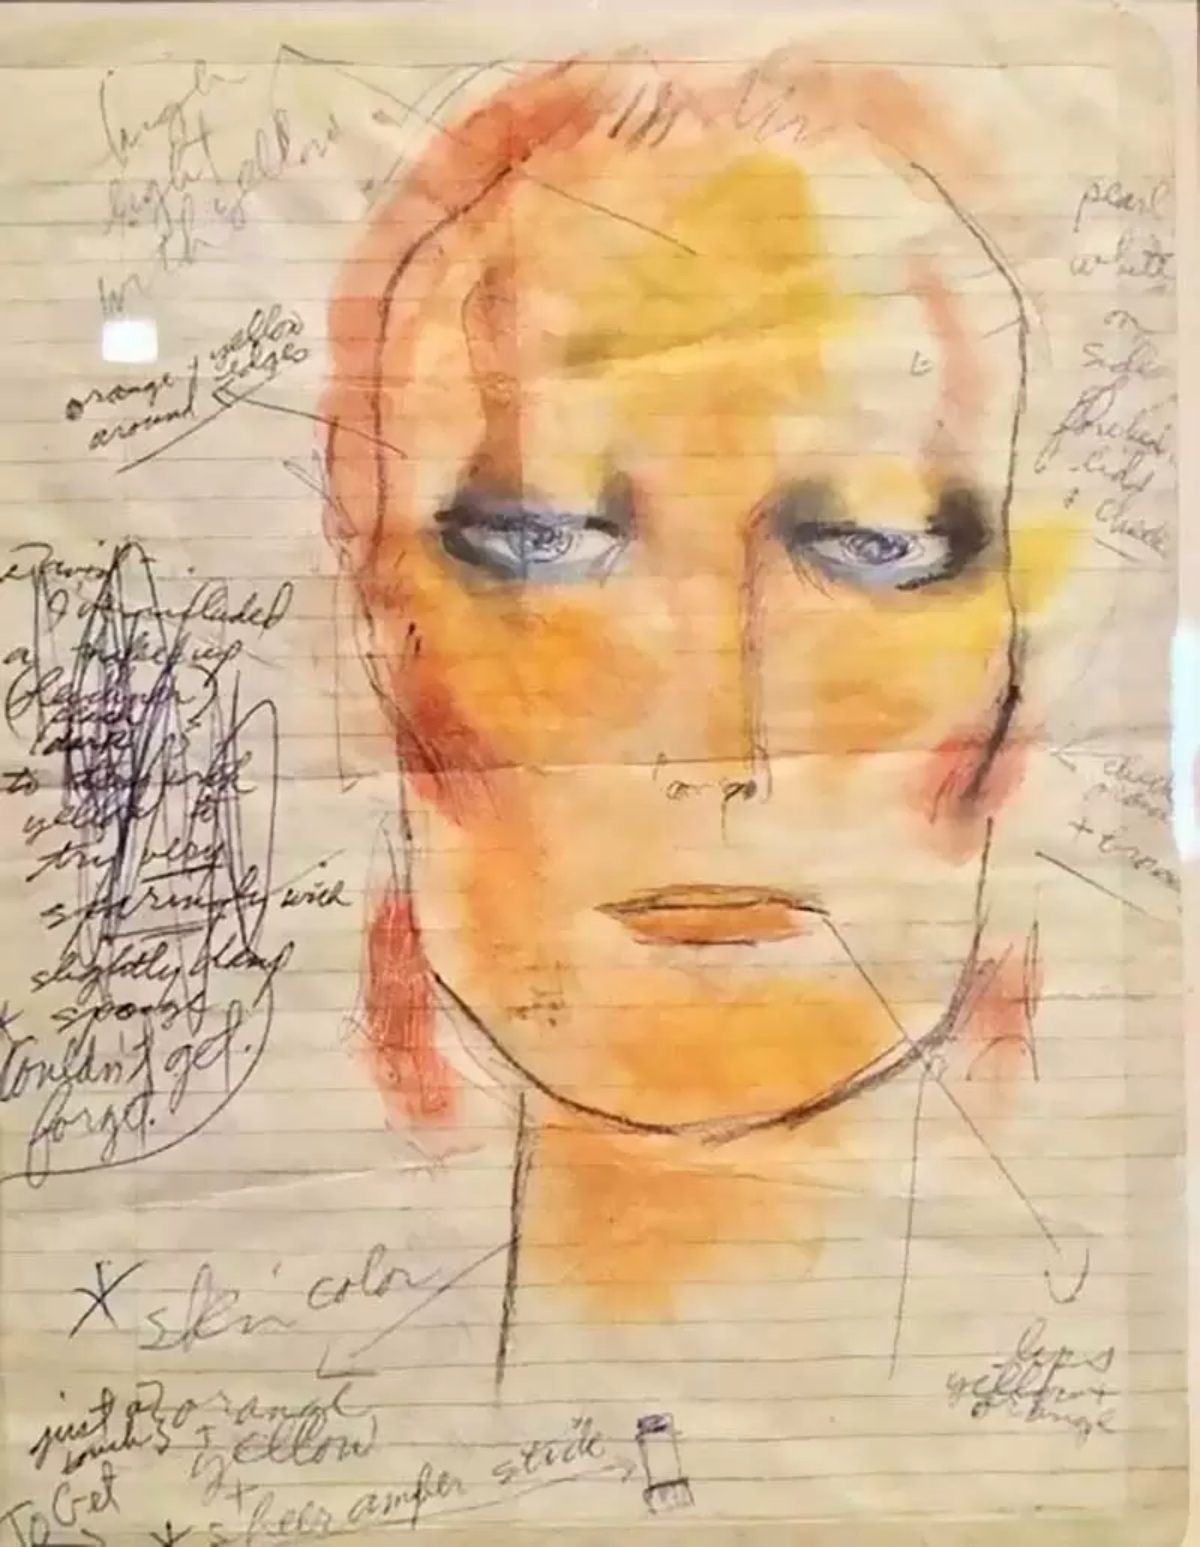 Sketches of David Bowie